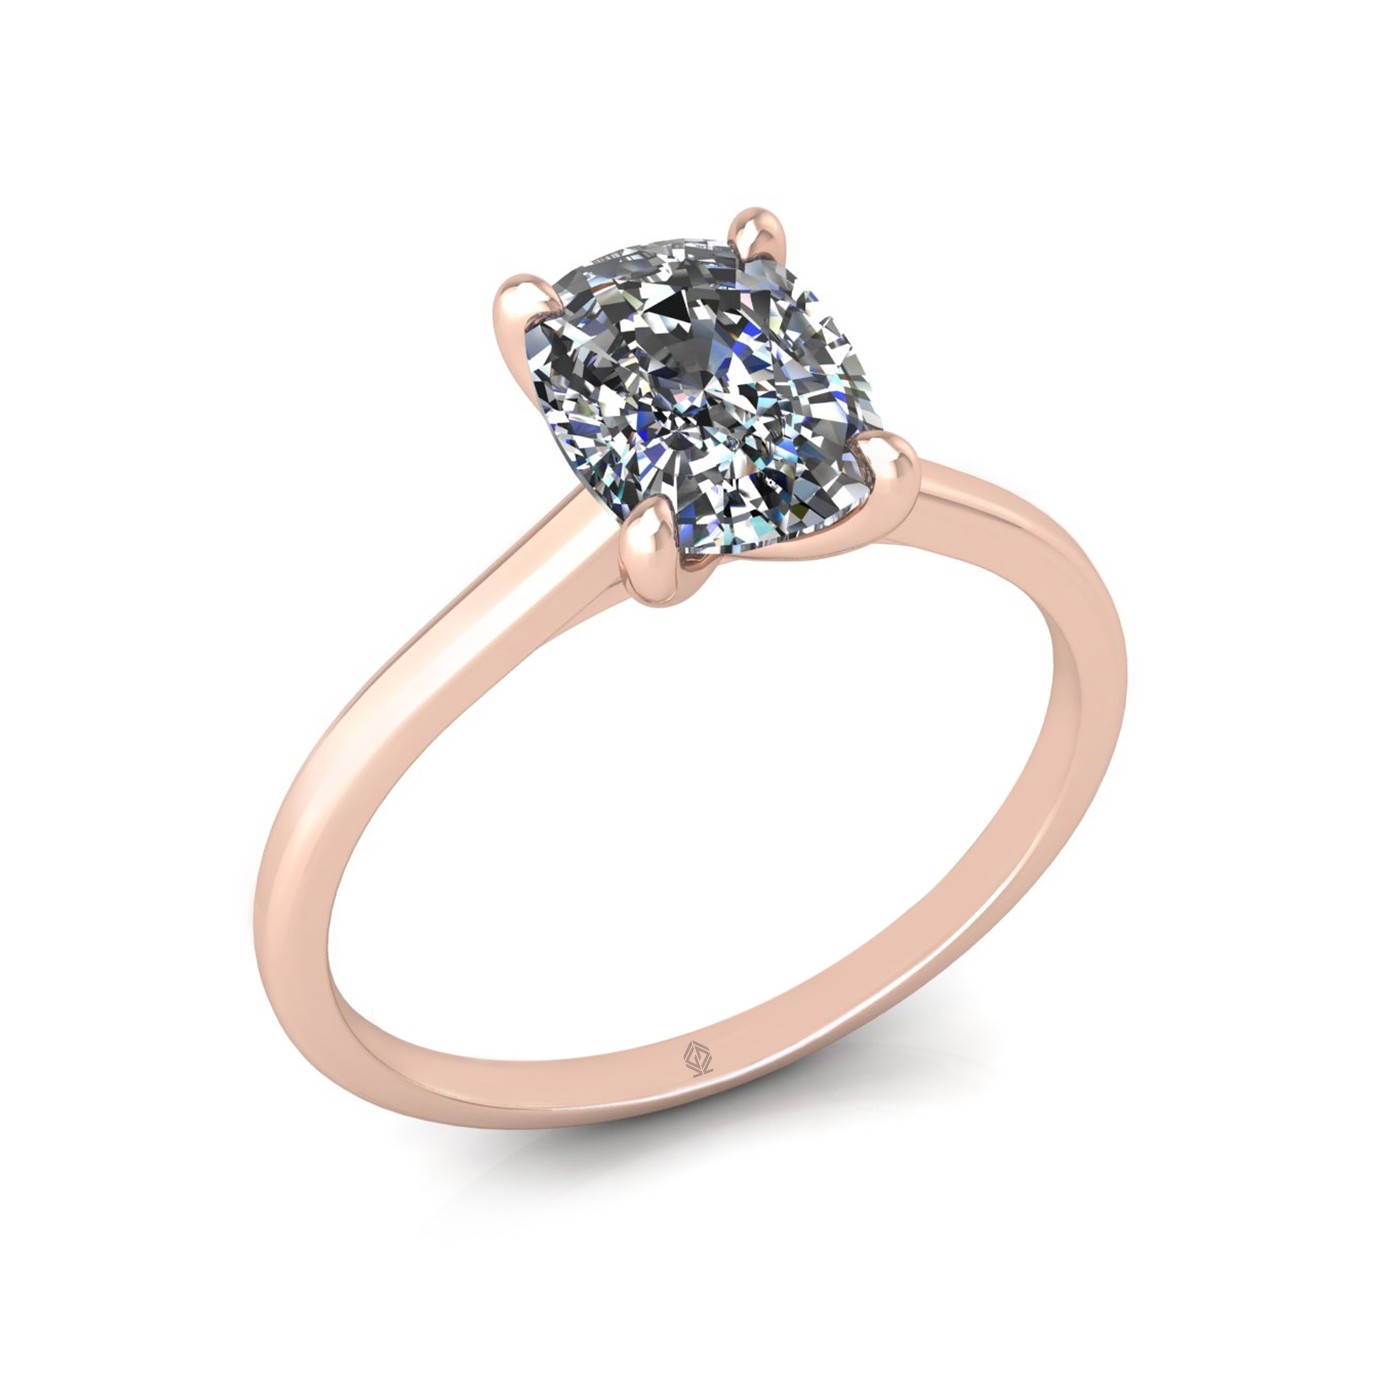 18k rose gold  2.00 ct 4 prongs solitaire elongated cushion cut diamond engagement ring with whisper thin band